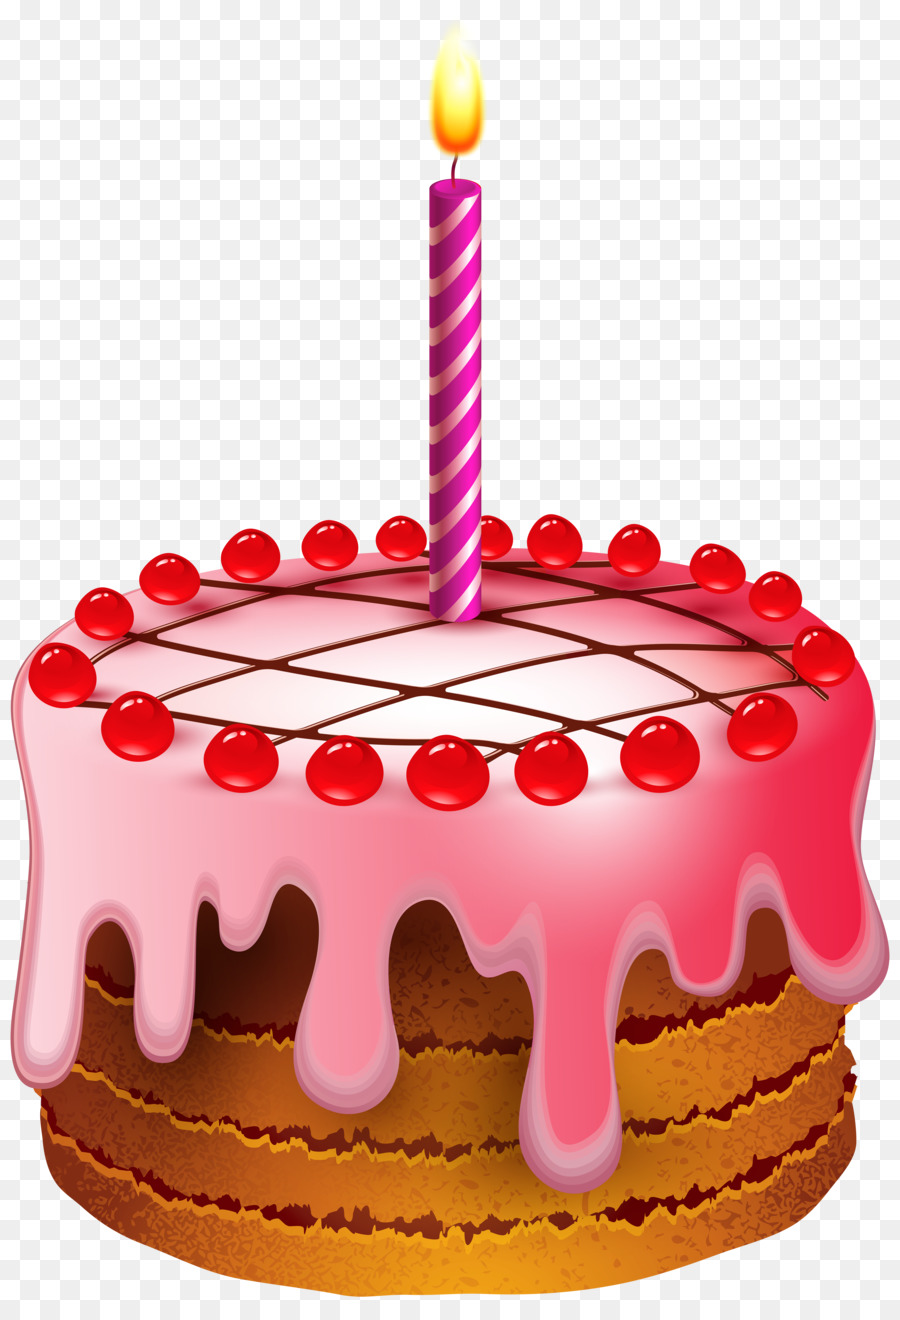 Birthday cake Clip art - Birthday Cake PNG Pic png download - 700*711 ...